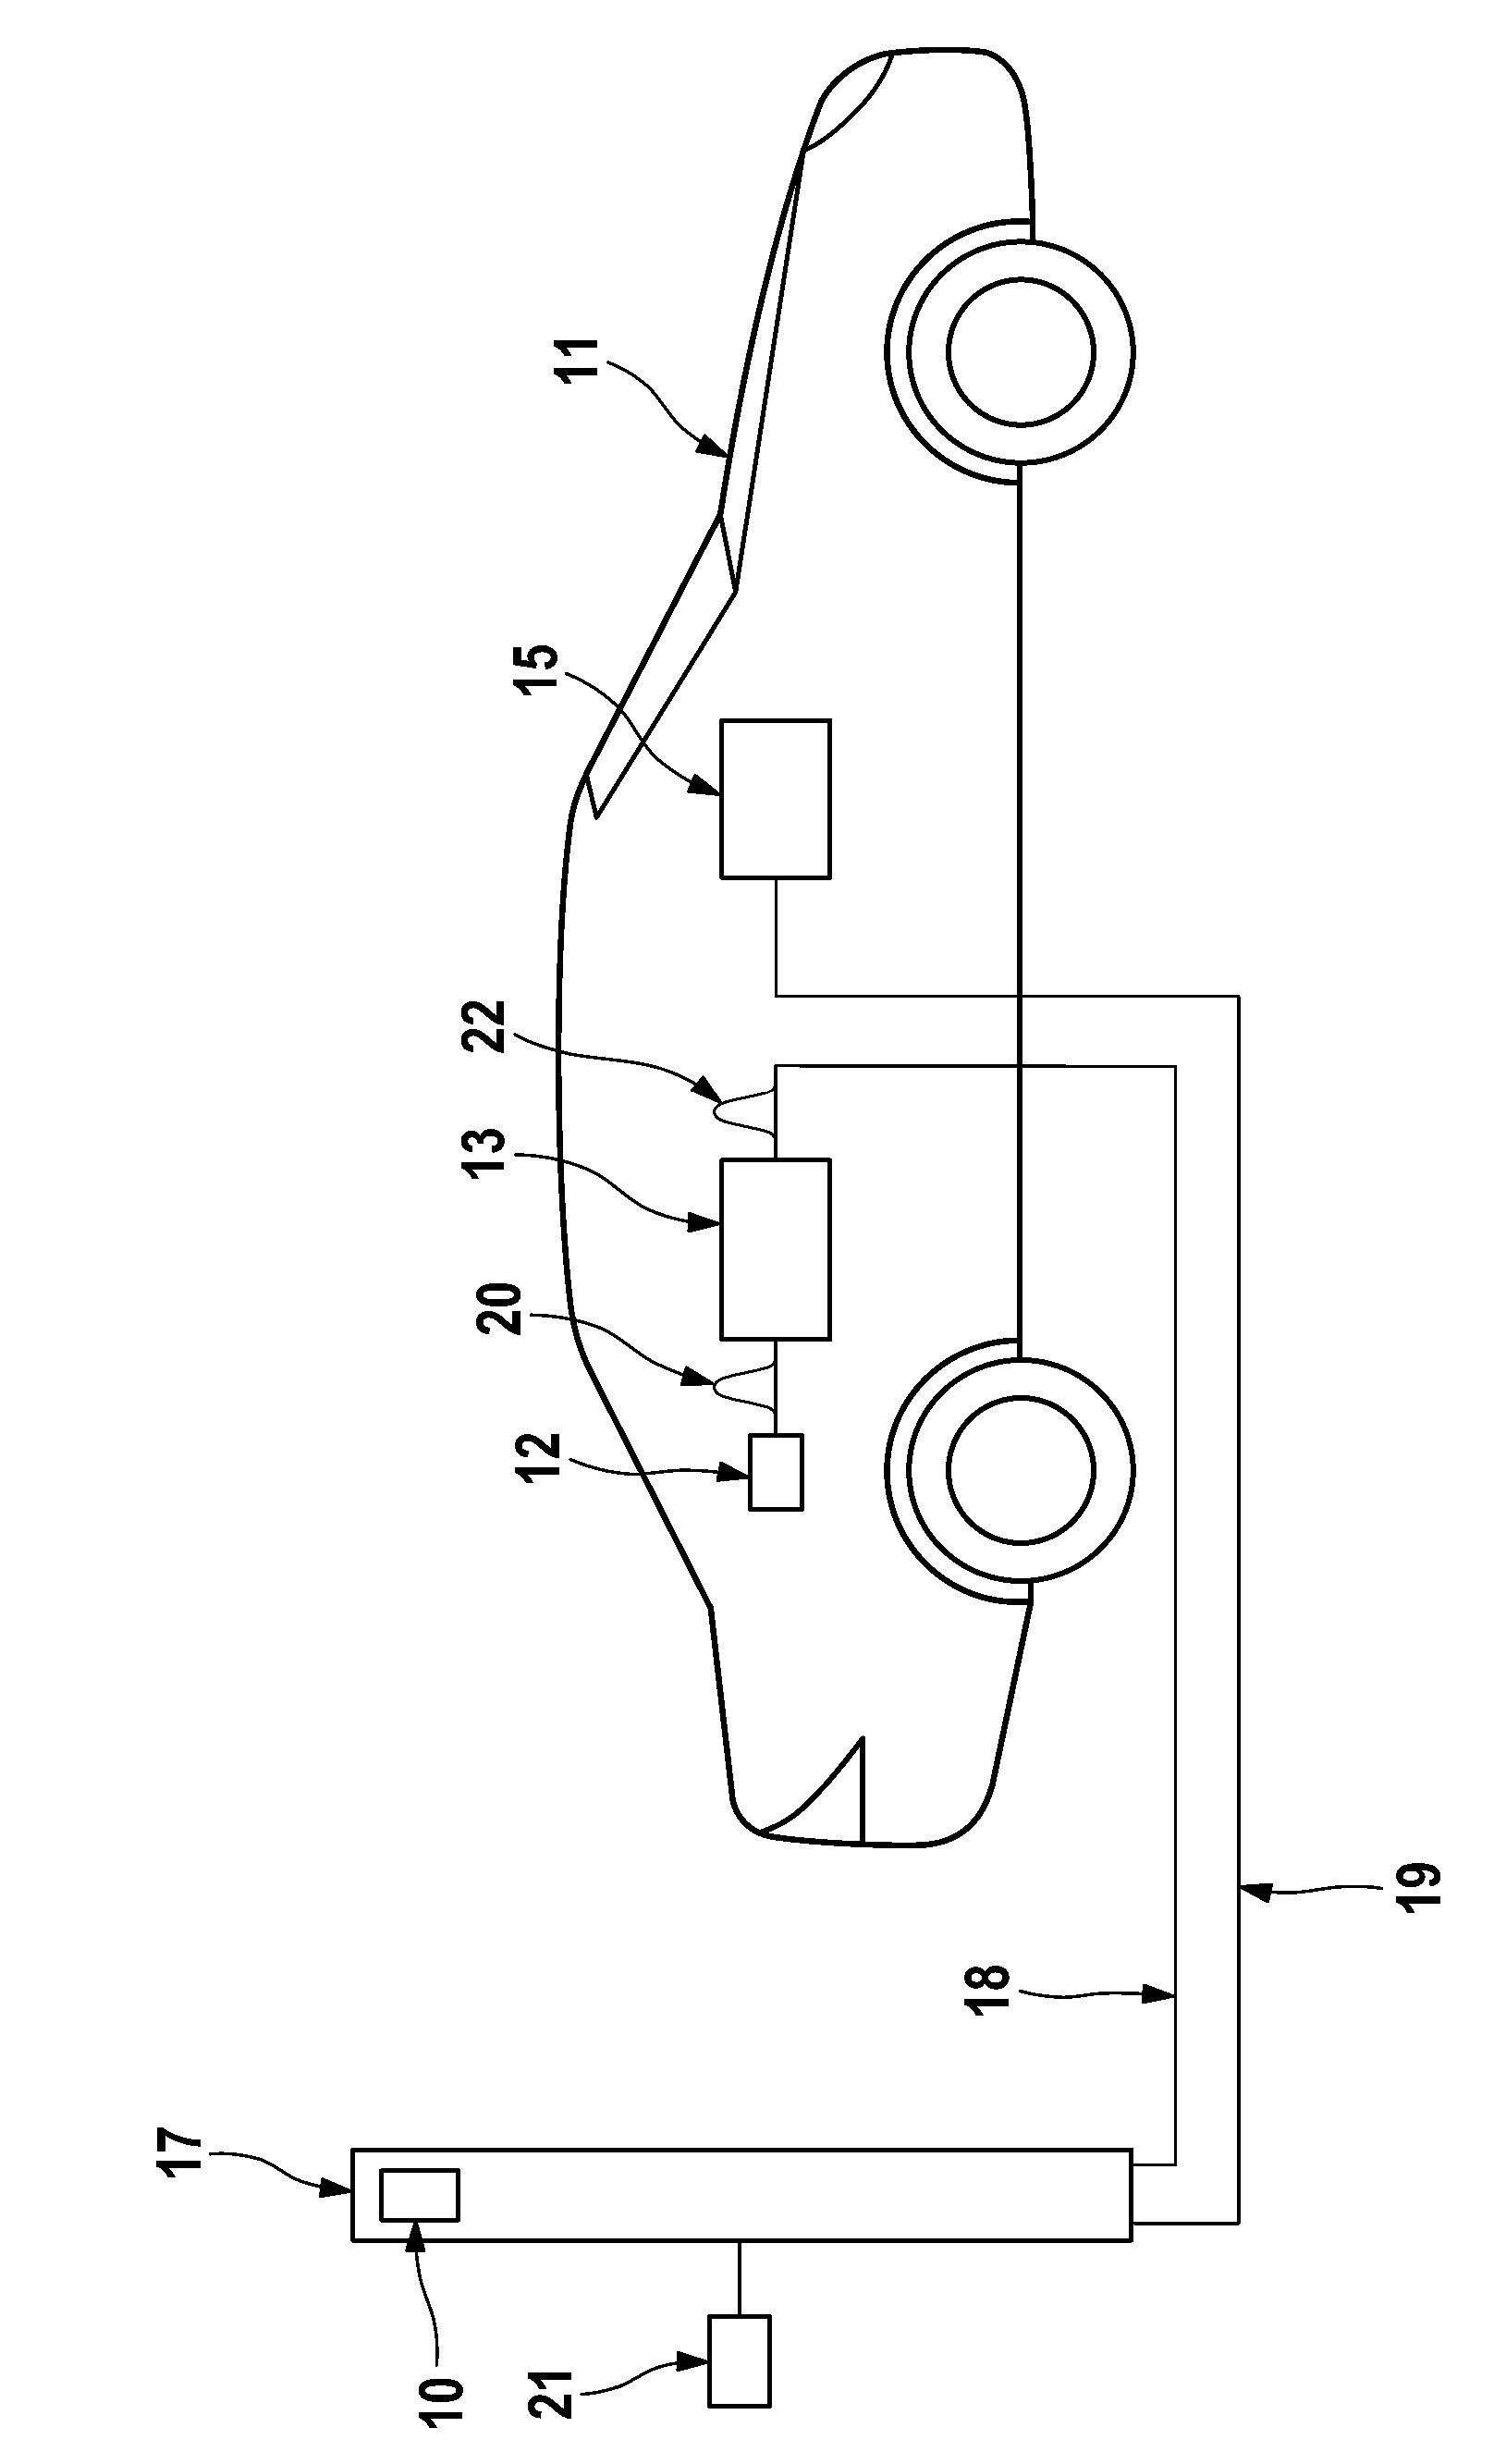 Method for charging hybrid vehicle or electric vehicle